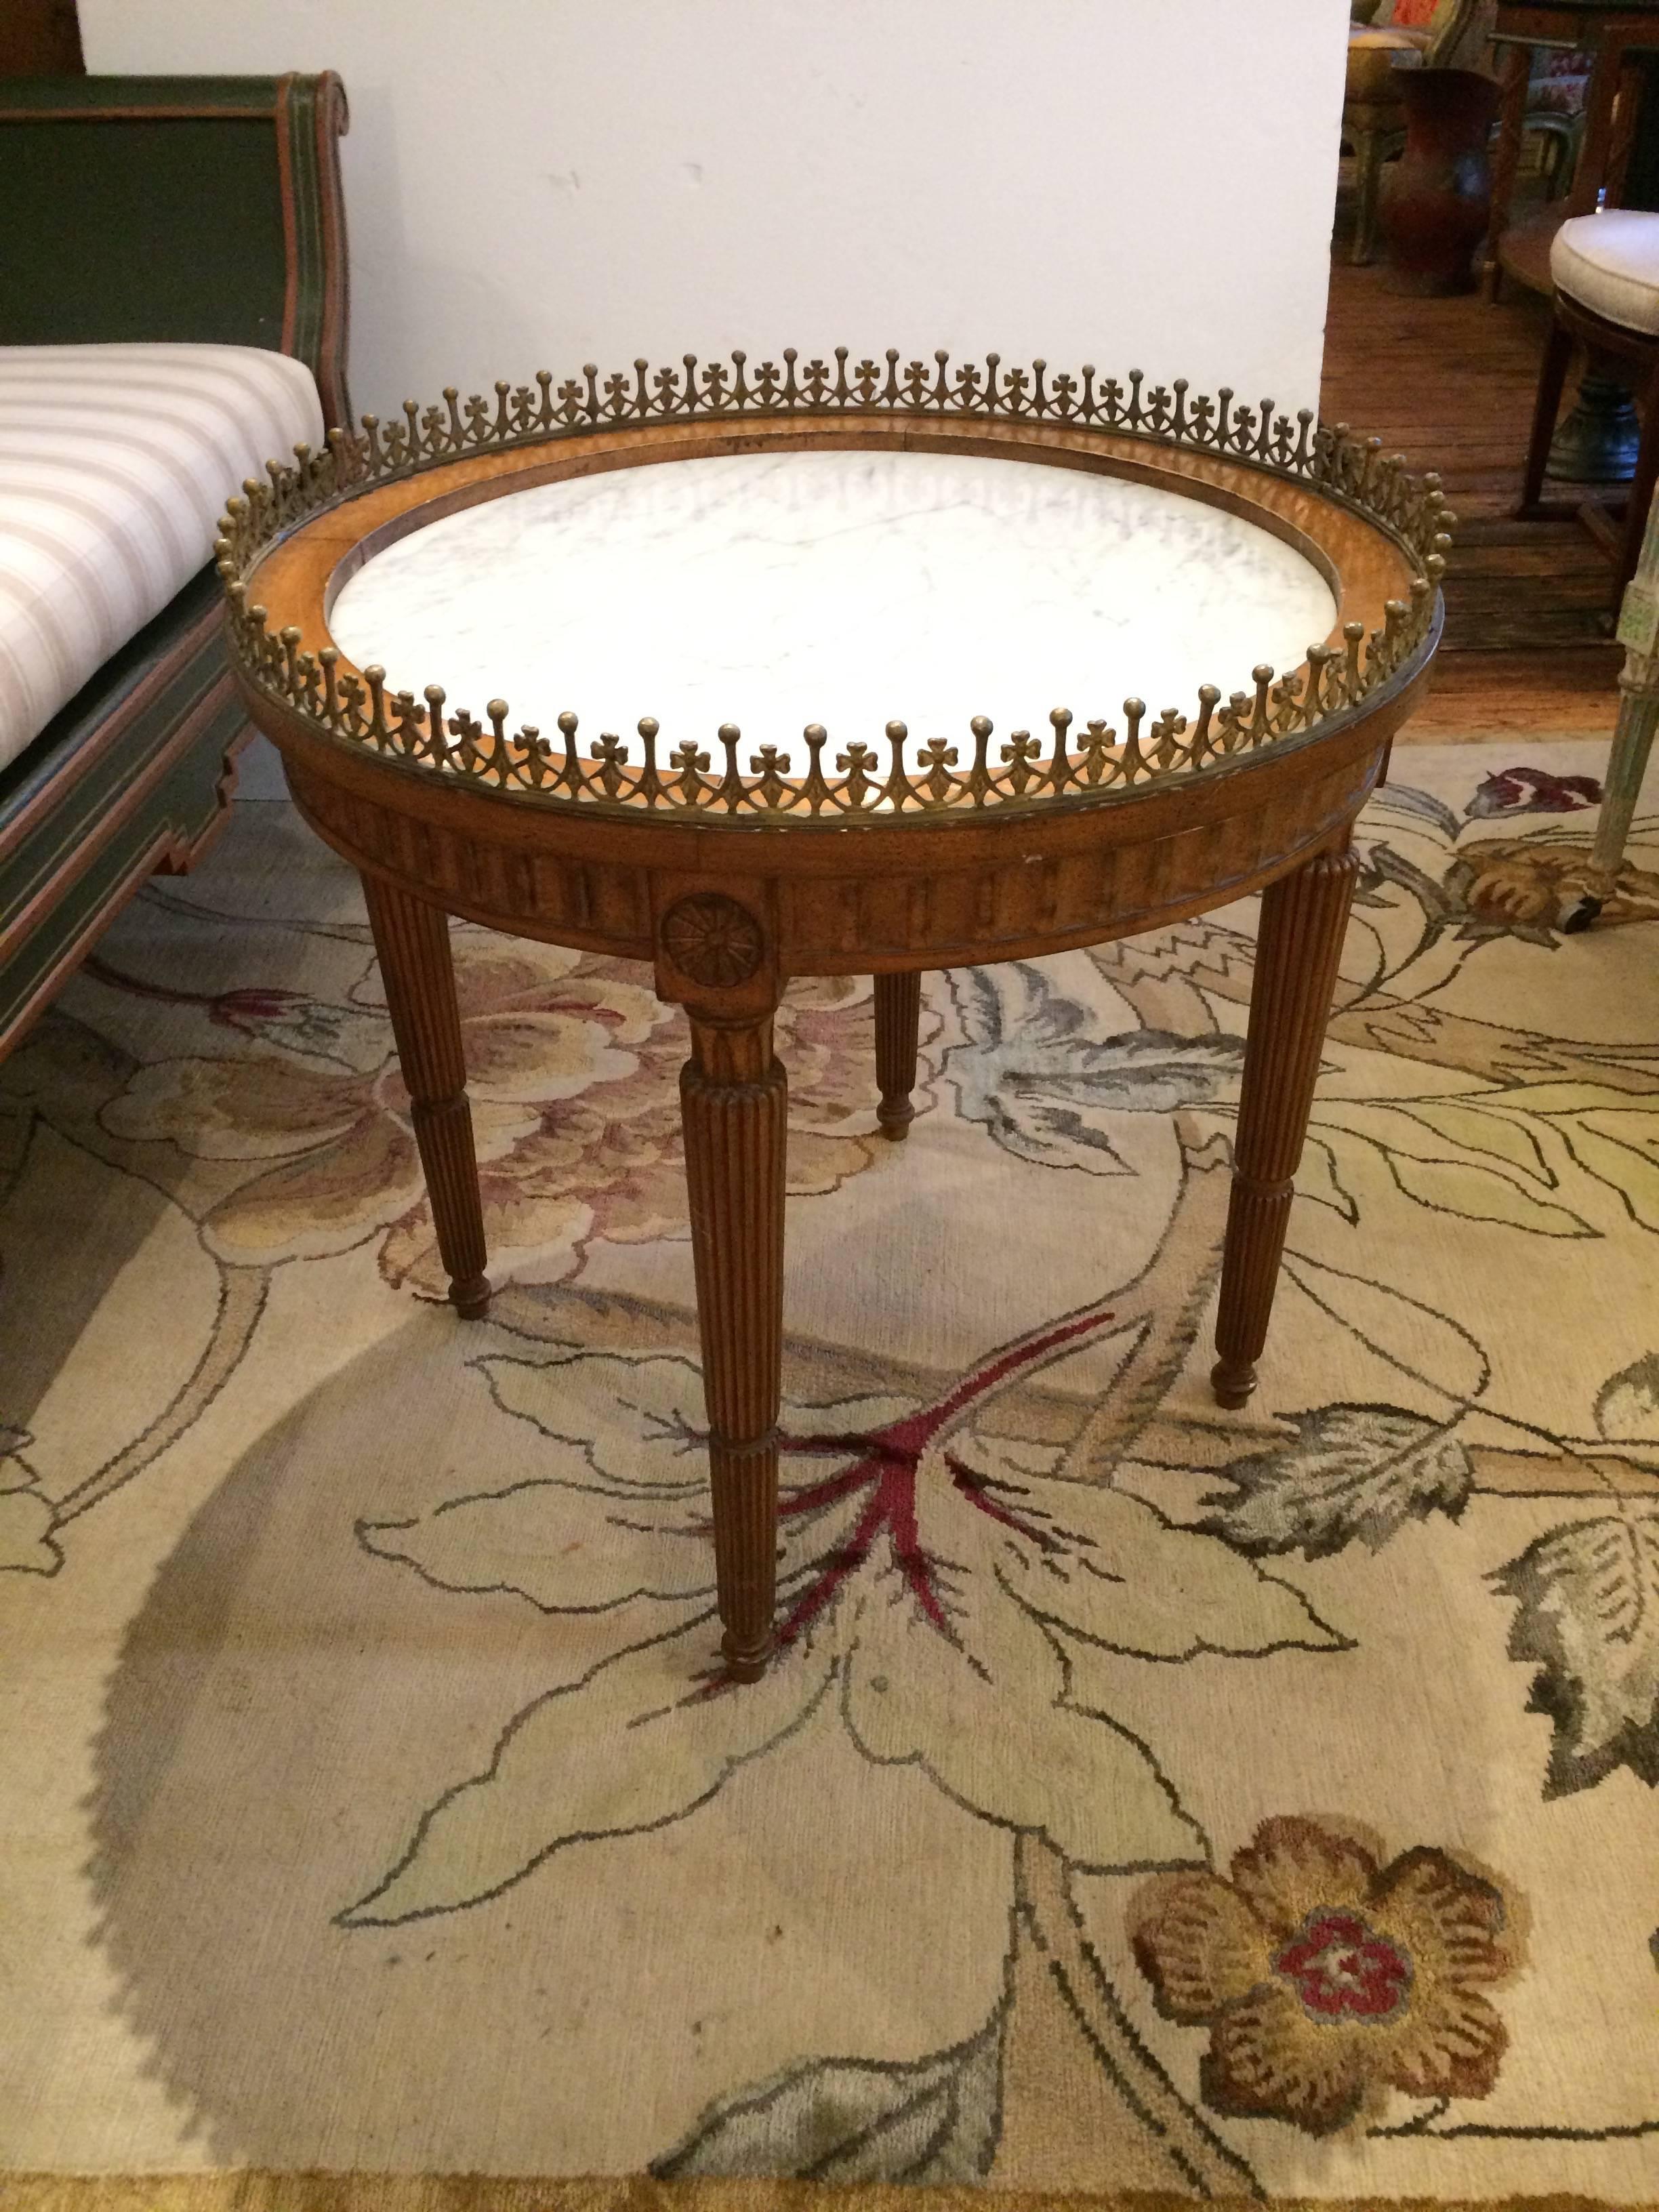 Gorgeous round carved walnut cocktail or side table having inset white marble top, tapered reeded legs, and special very decorative bronze gallery around the periphery.